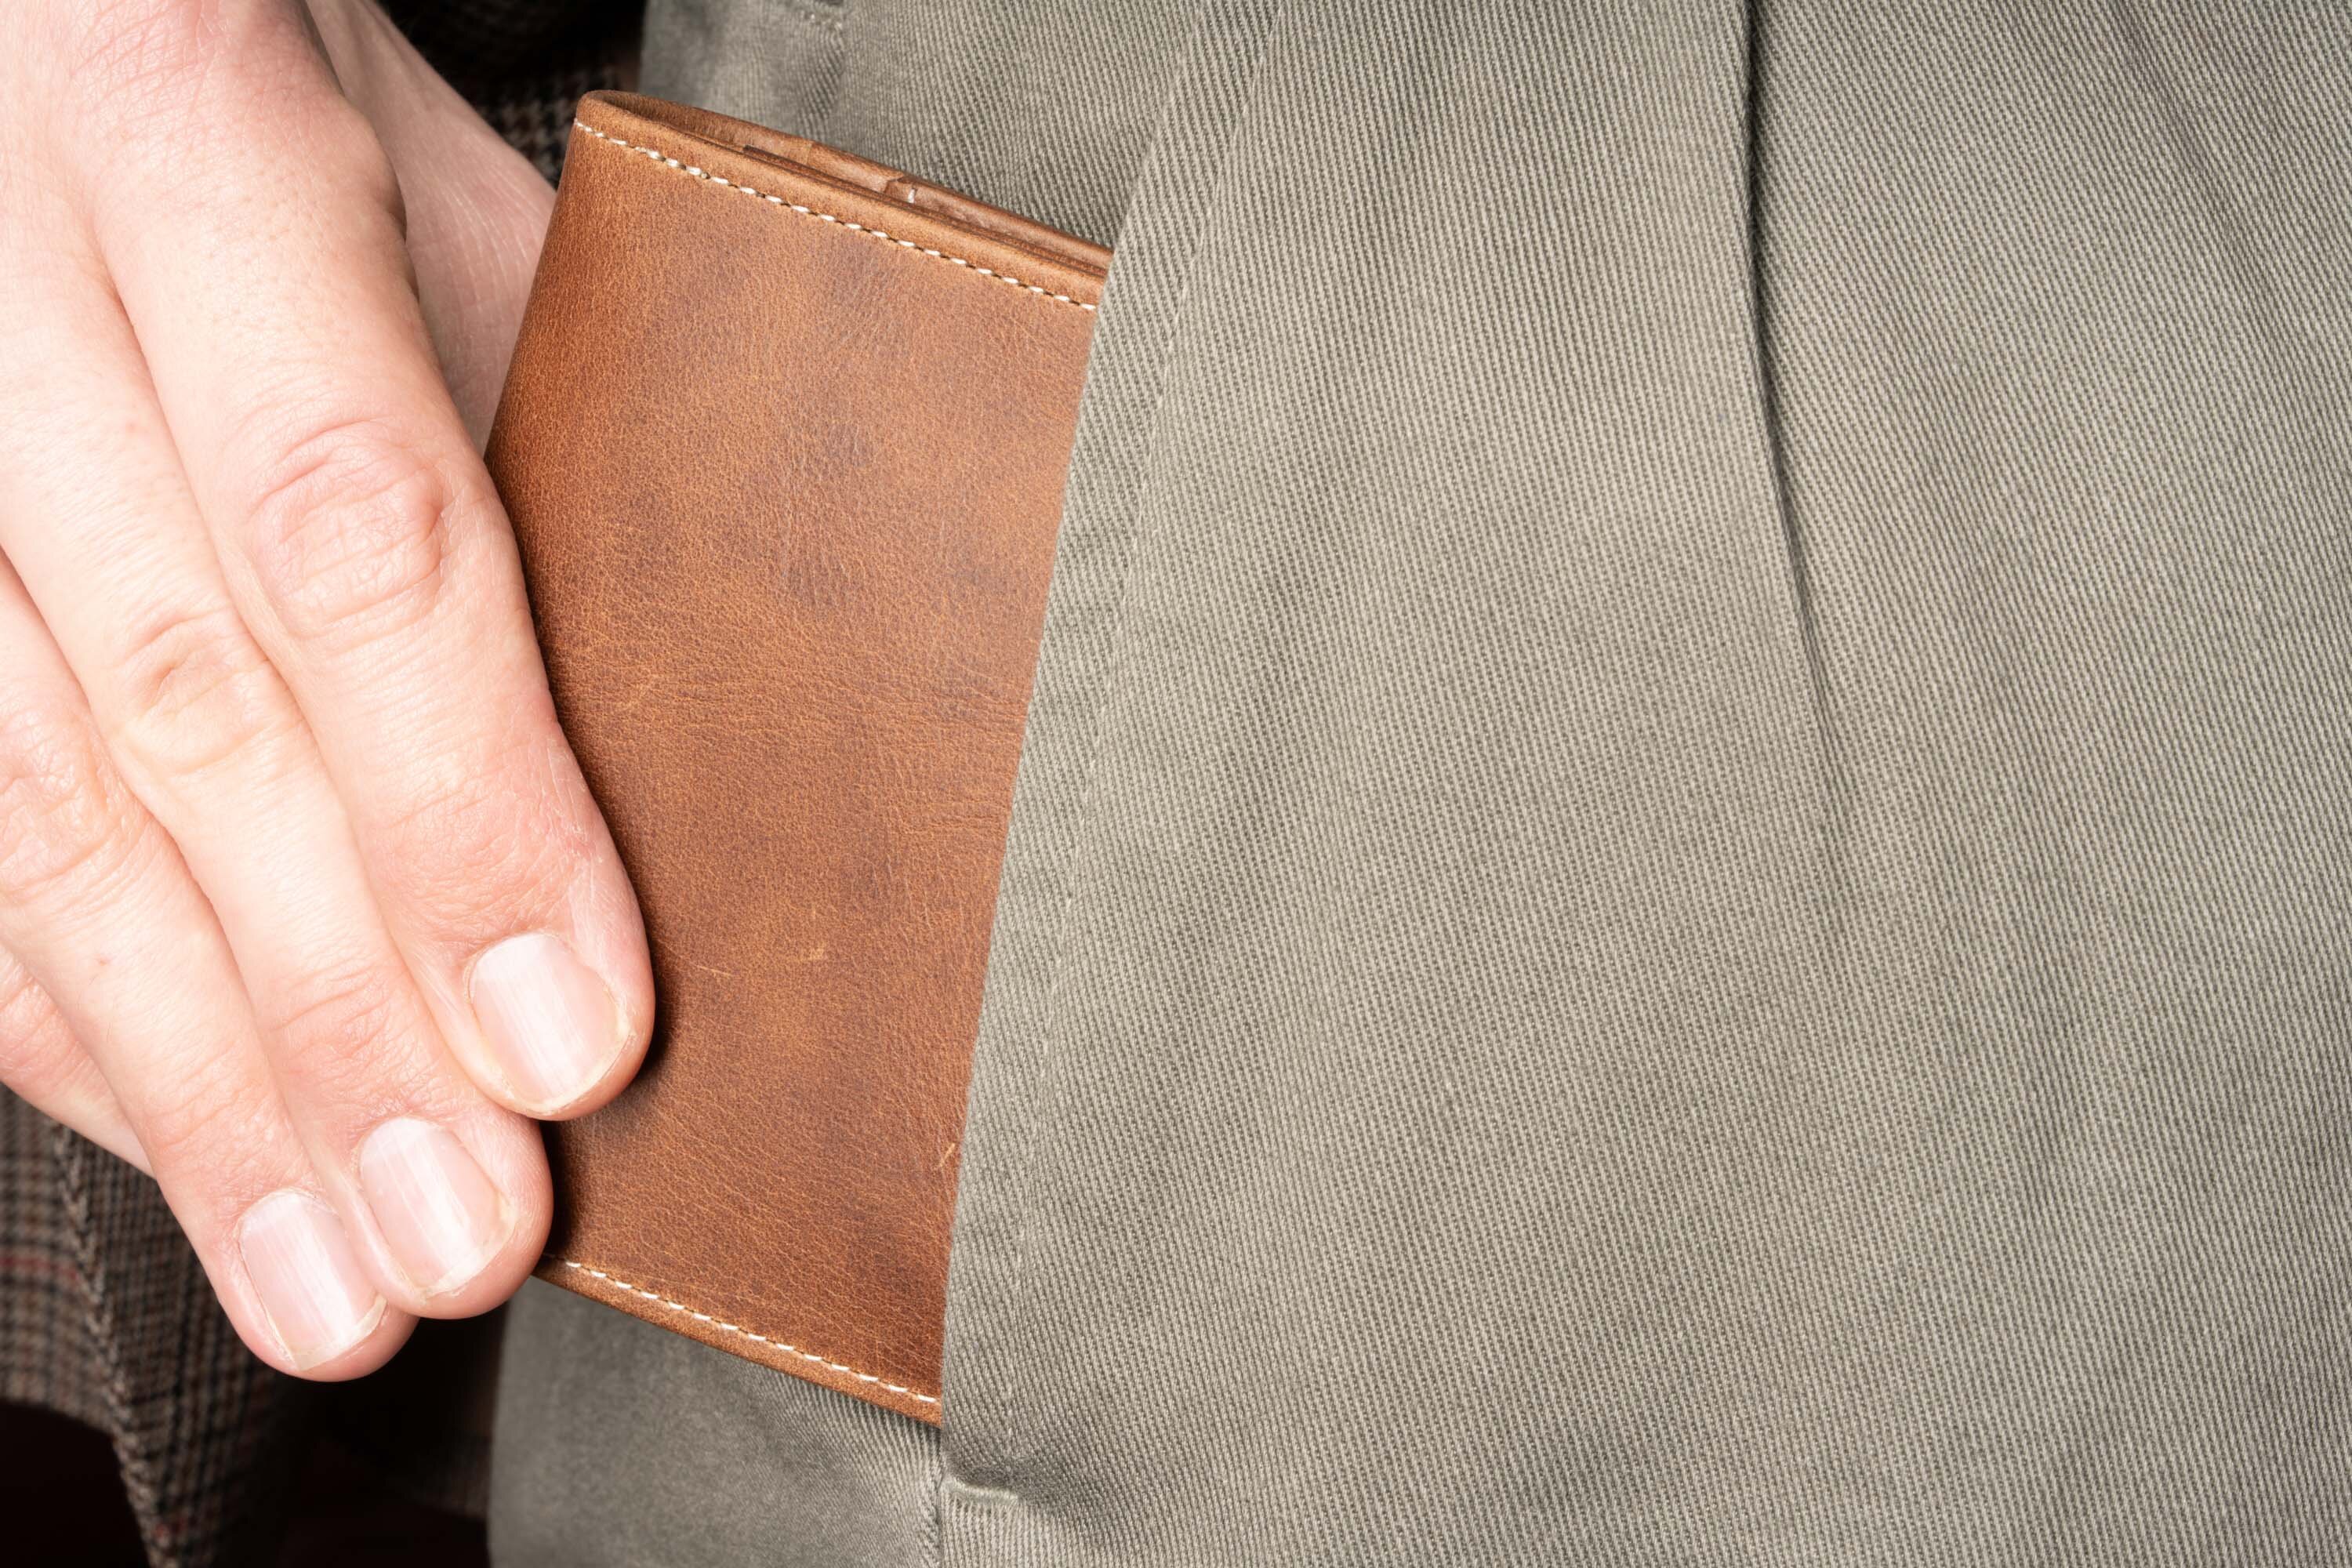 Saddle Brown Bifold Wallet in Full-Grain Montecristo Leather Inserted to the pocket